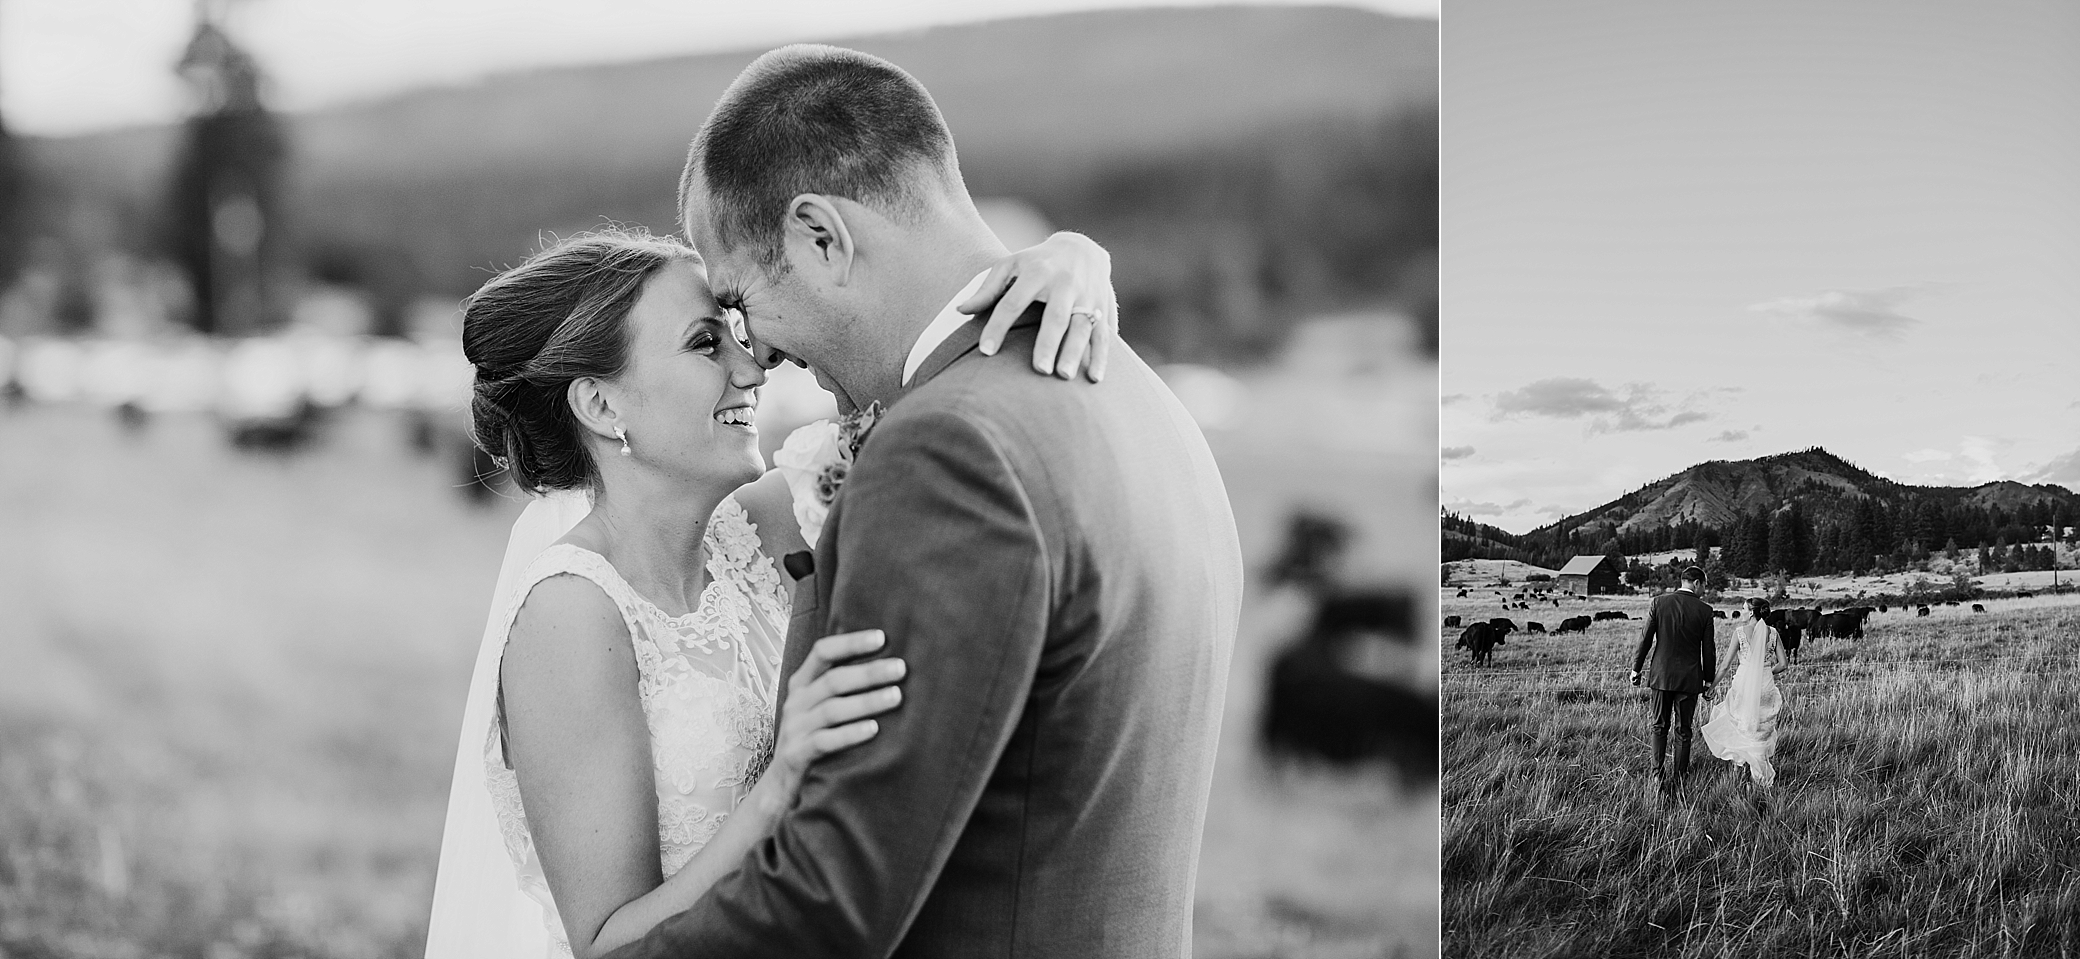 Bride and Groom Wedding Portraits at The Cattle Barn. Photographed by WA Wedding Photographer, Megan Montalvo Photography